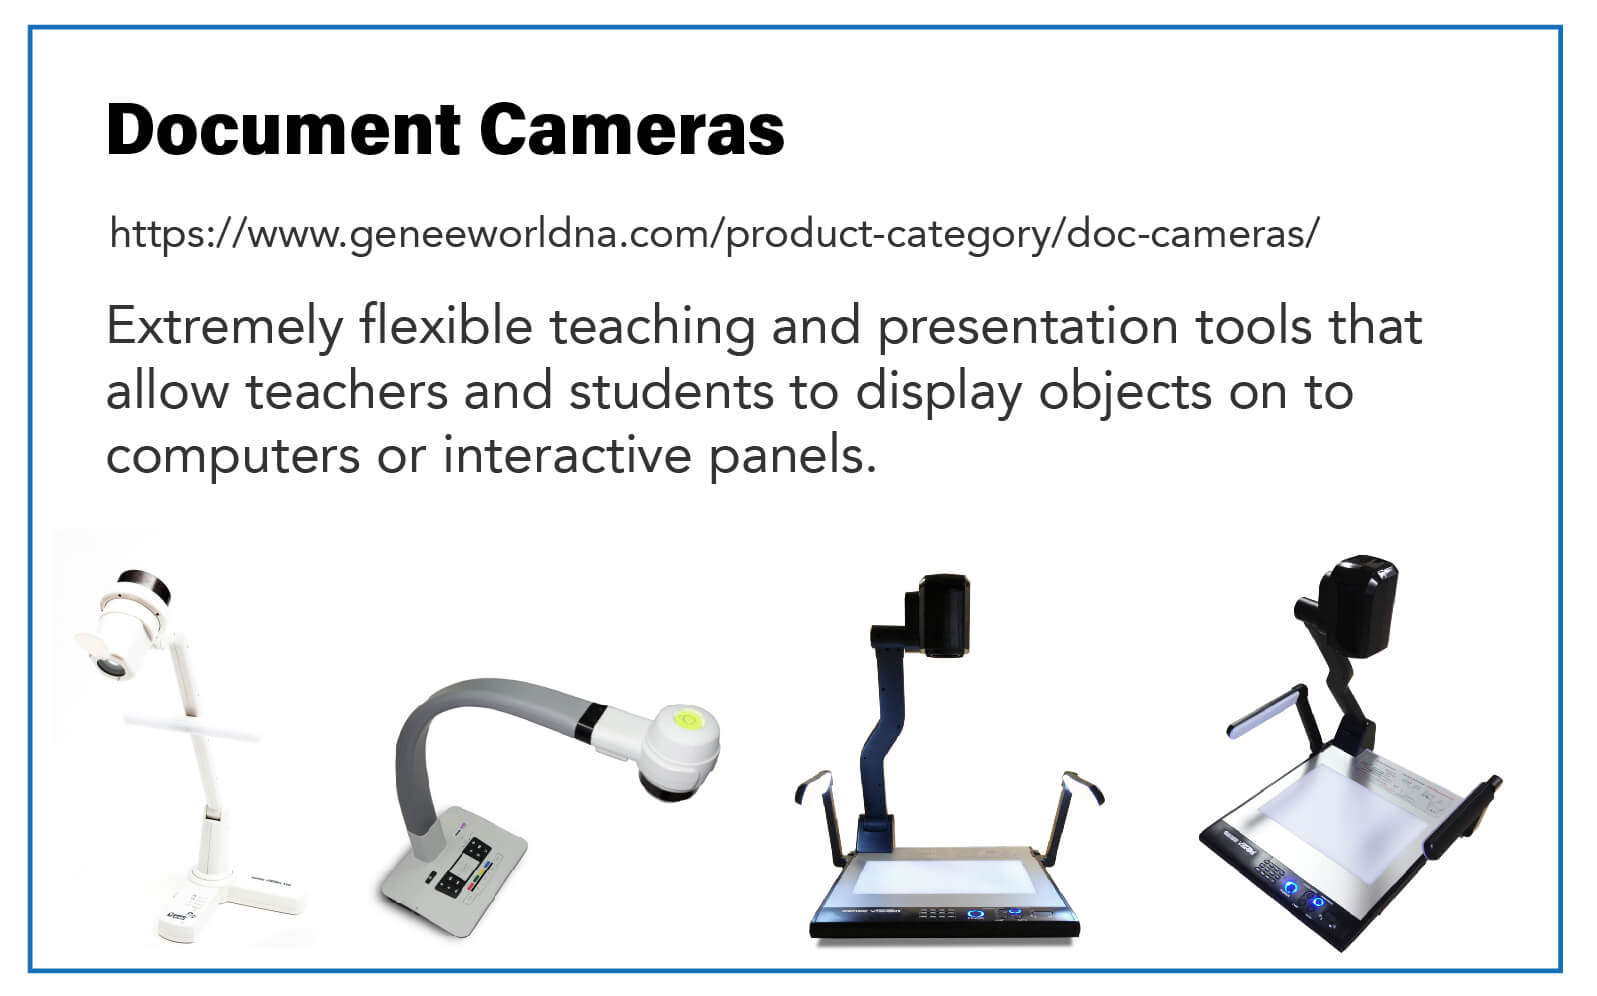 Document Cameras: Extremely flexible teaching and presentation tools that allow teachers and students to display objects on to computers or interactive panels.